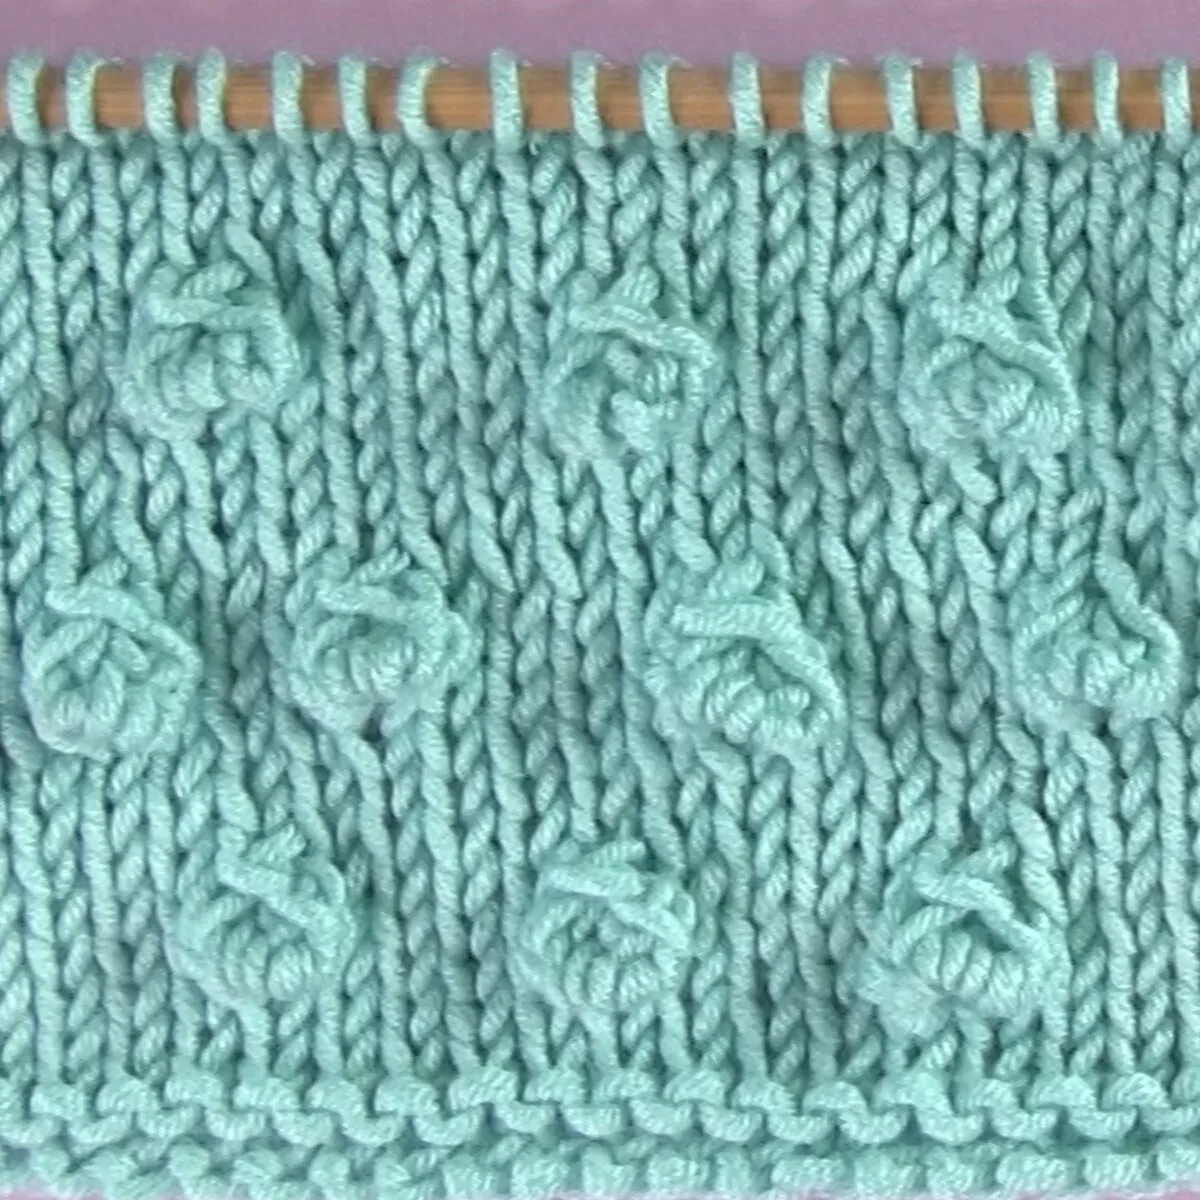 Small sized Bobbles in Stockinette Stitch on knitting needle in light blue color yarn.